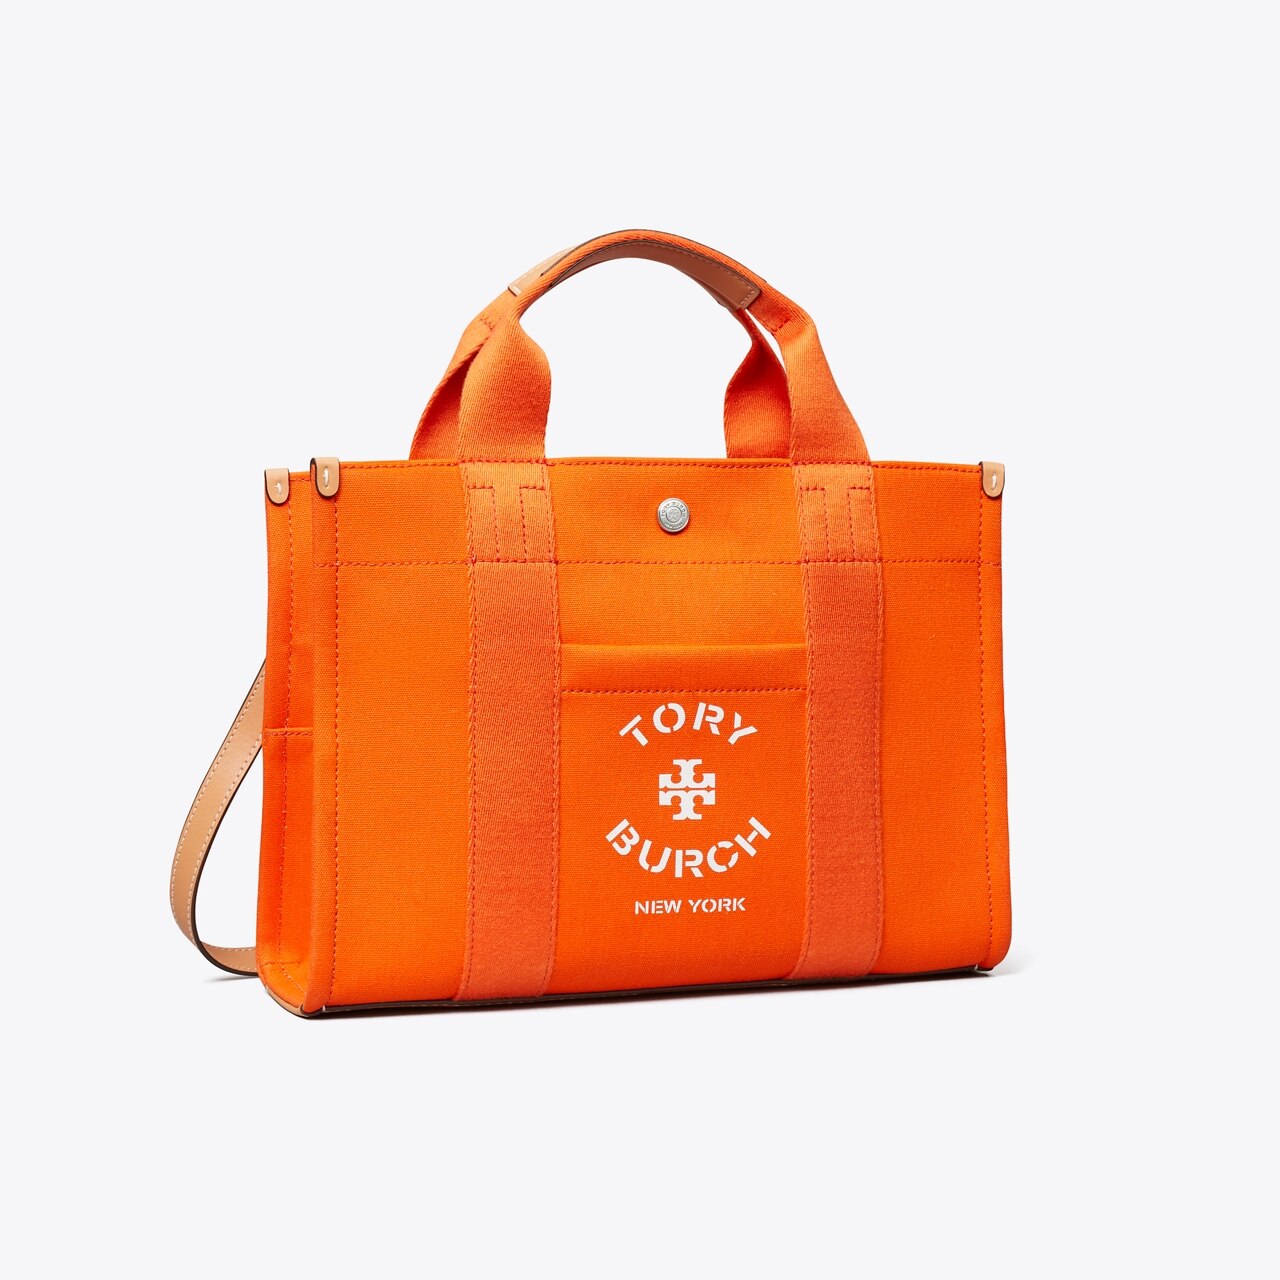 Tory Burch Whipstitch Tote Bags for Women